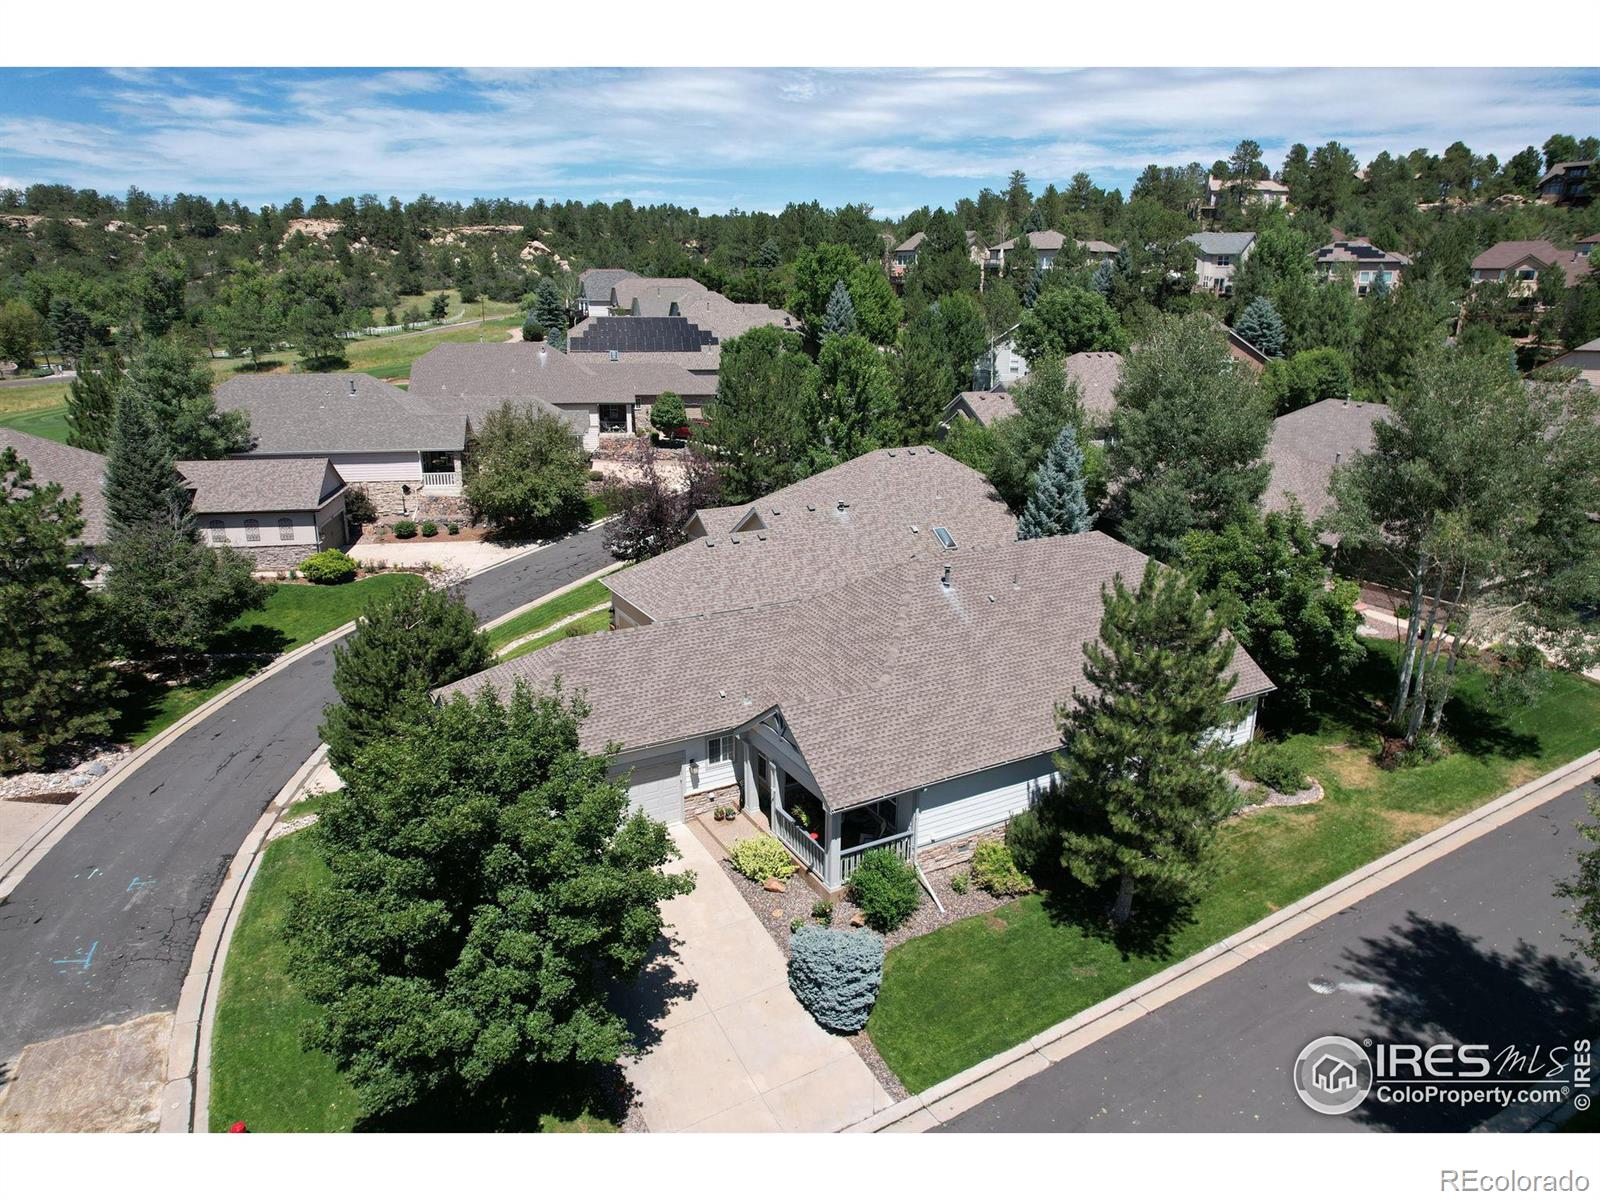 1384  Castlepoint Circle, castle pines MLS: 4567891001083 Beds: 3 Baths: 3 Price: $820,000